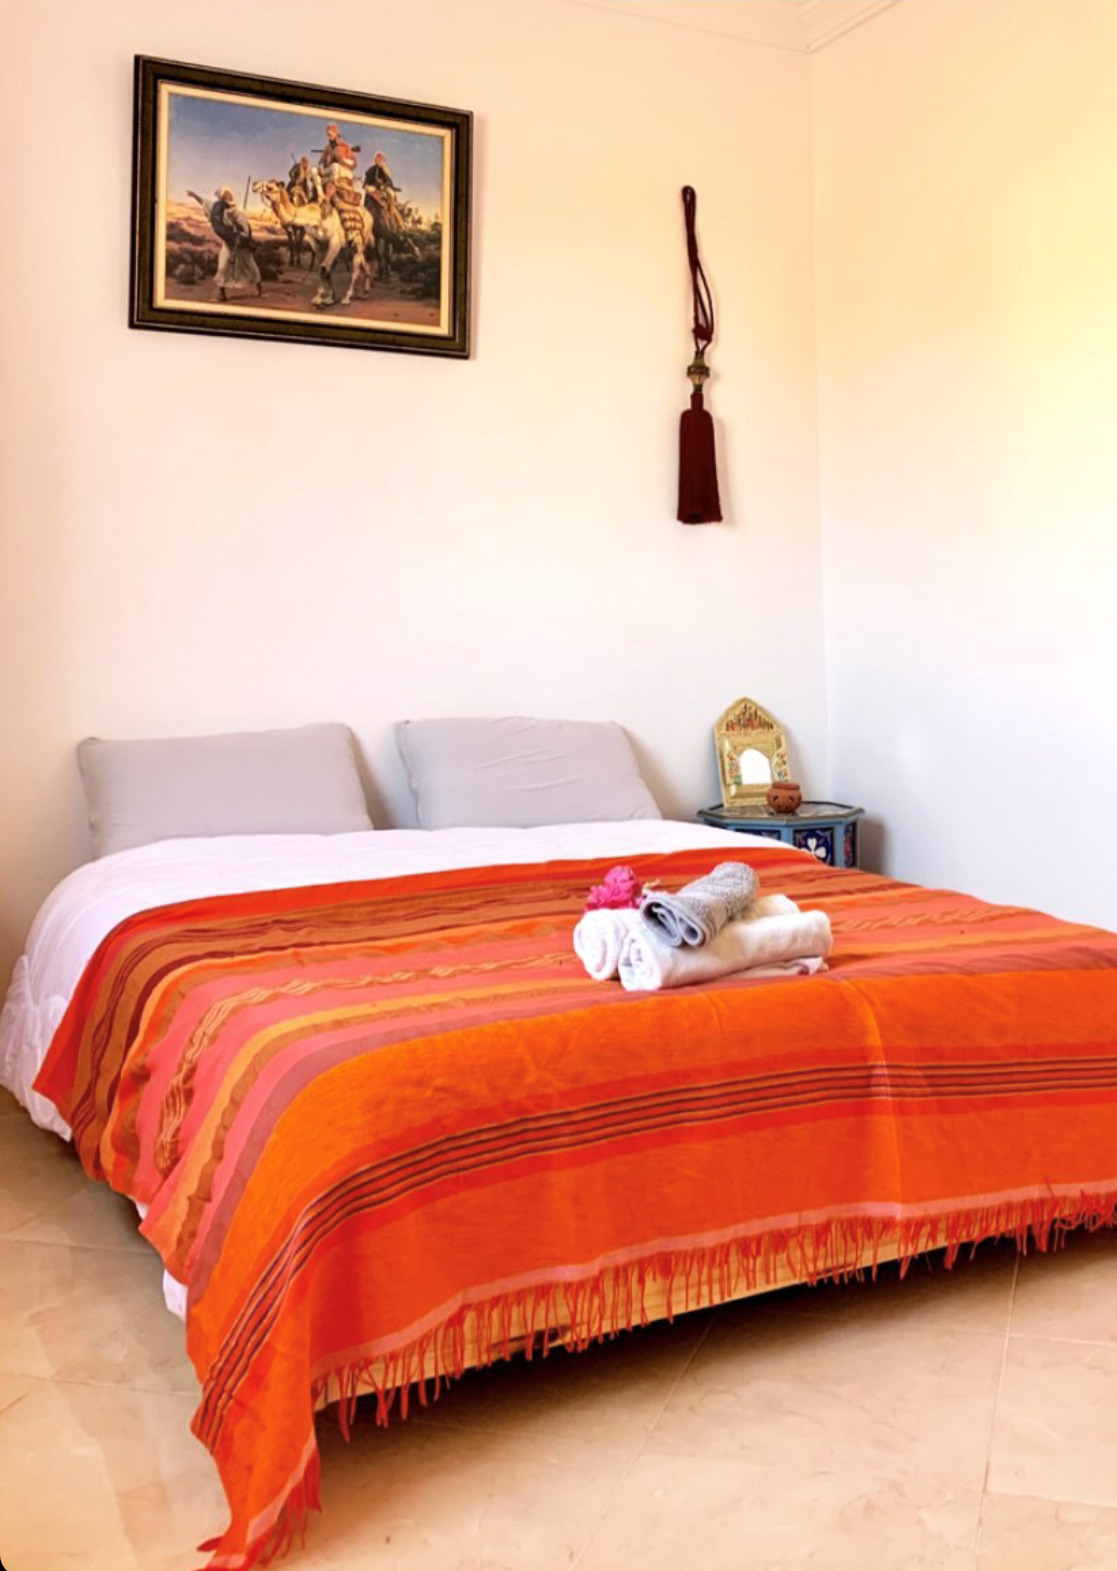 Private room surfcamp accommodation in Morocco Taghazout